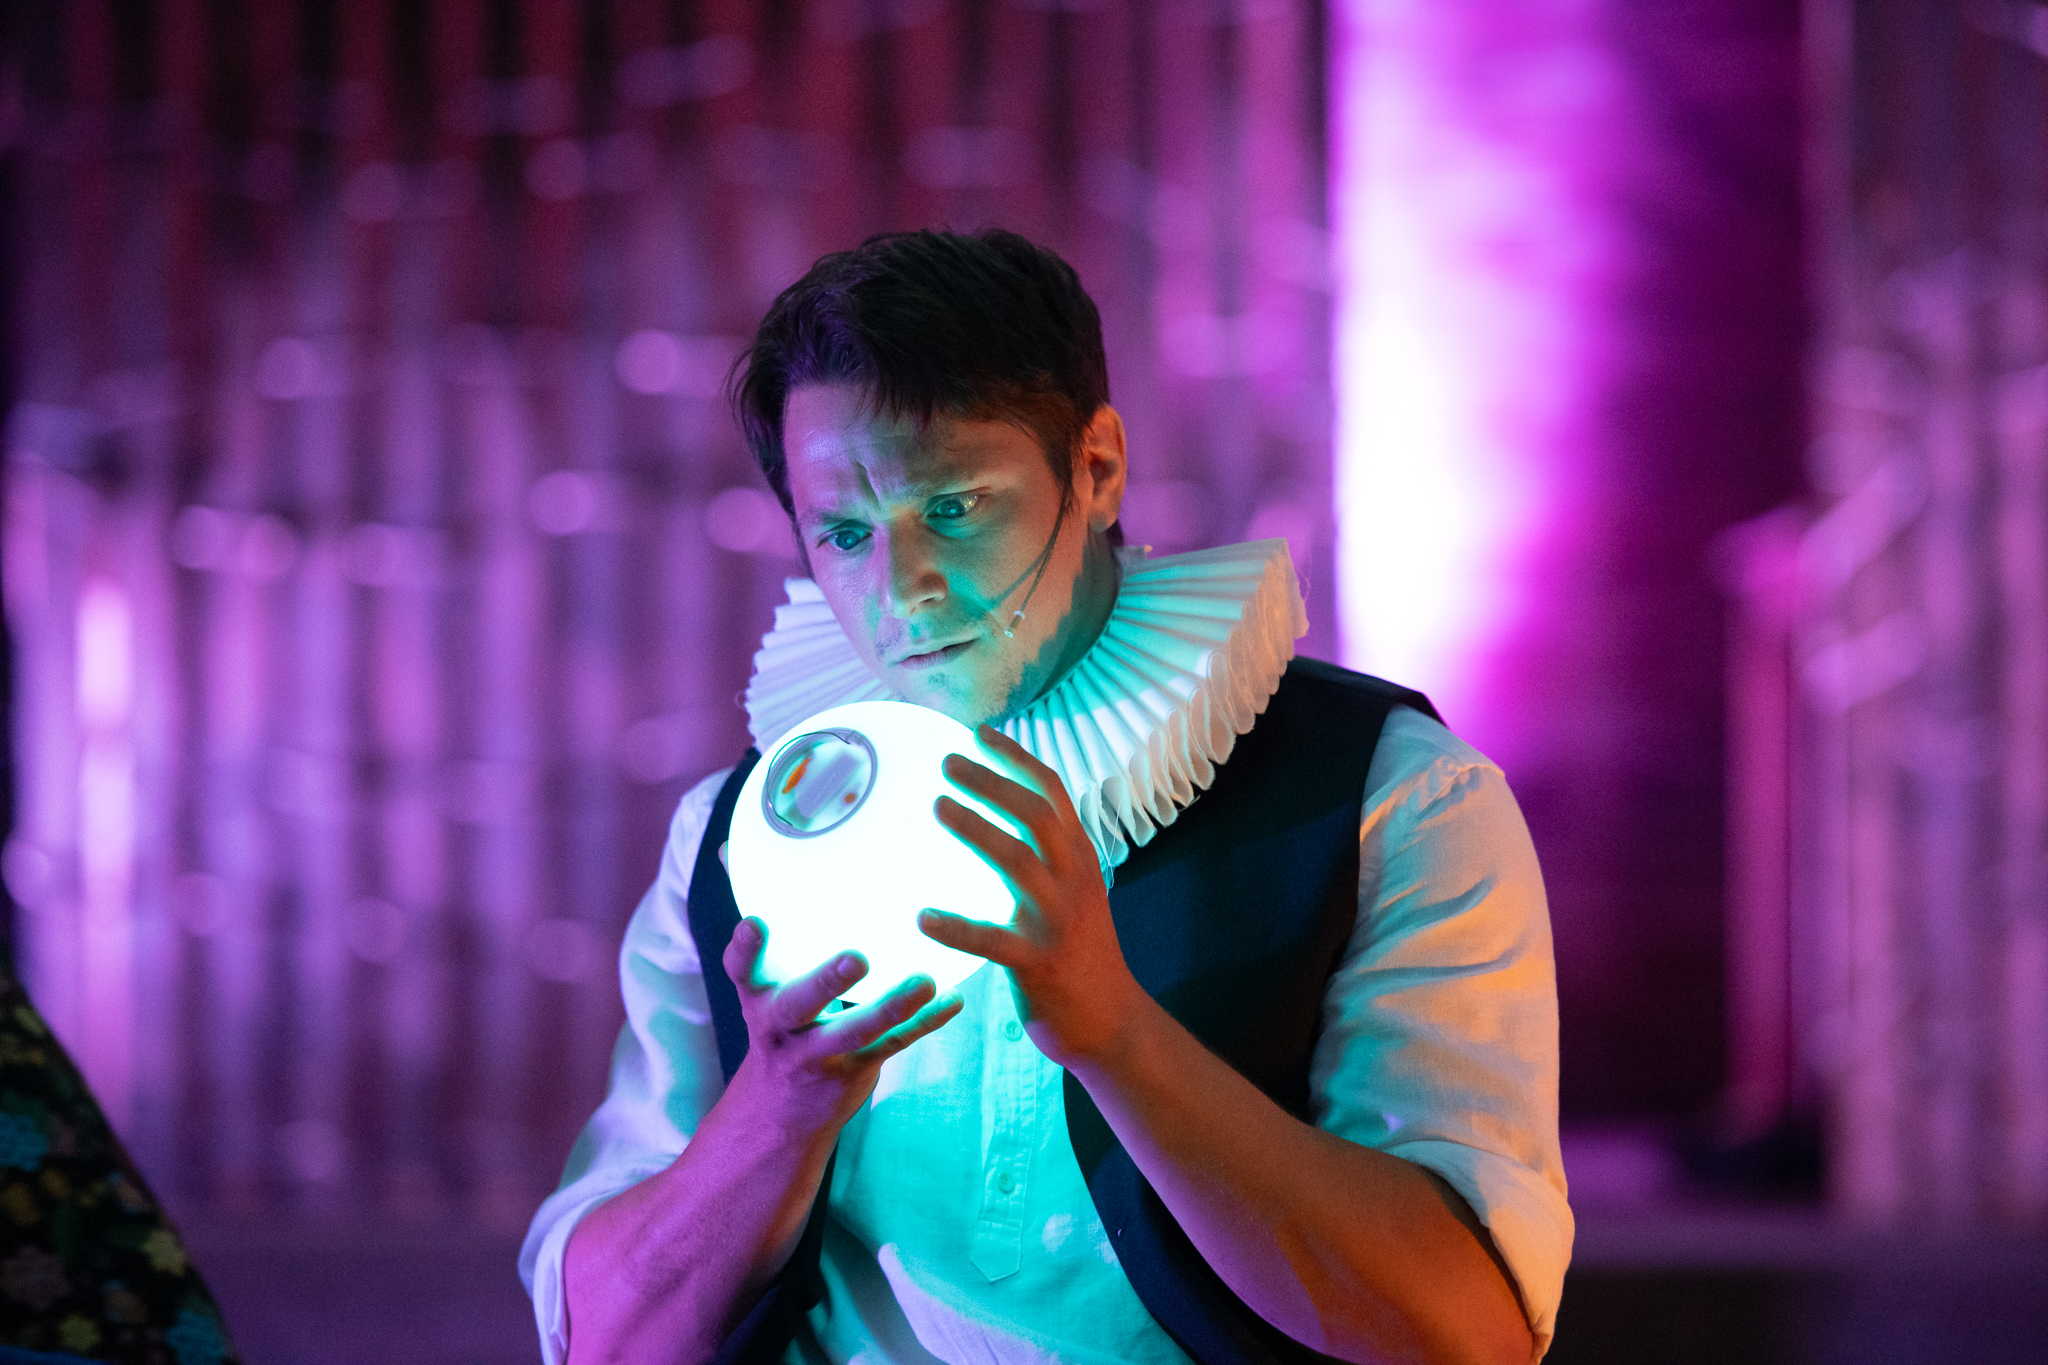 Hamish, portrayed by Jonathan LeRose, is transfixed by a ball of light in his hands.